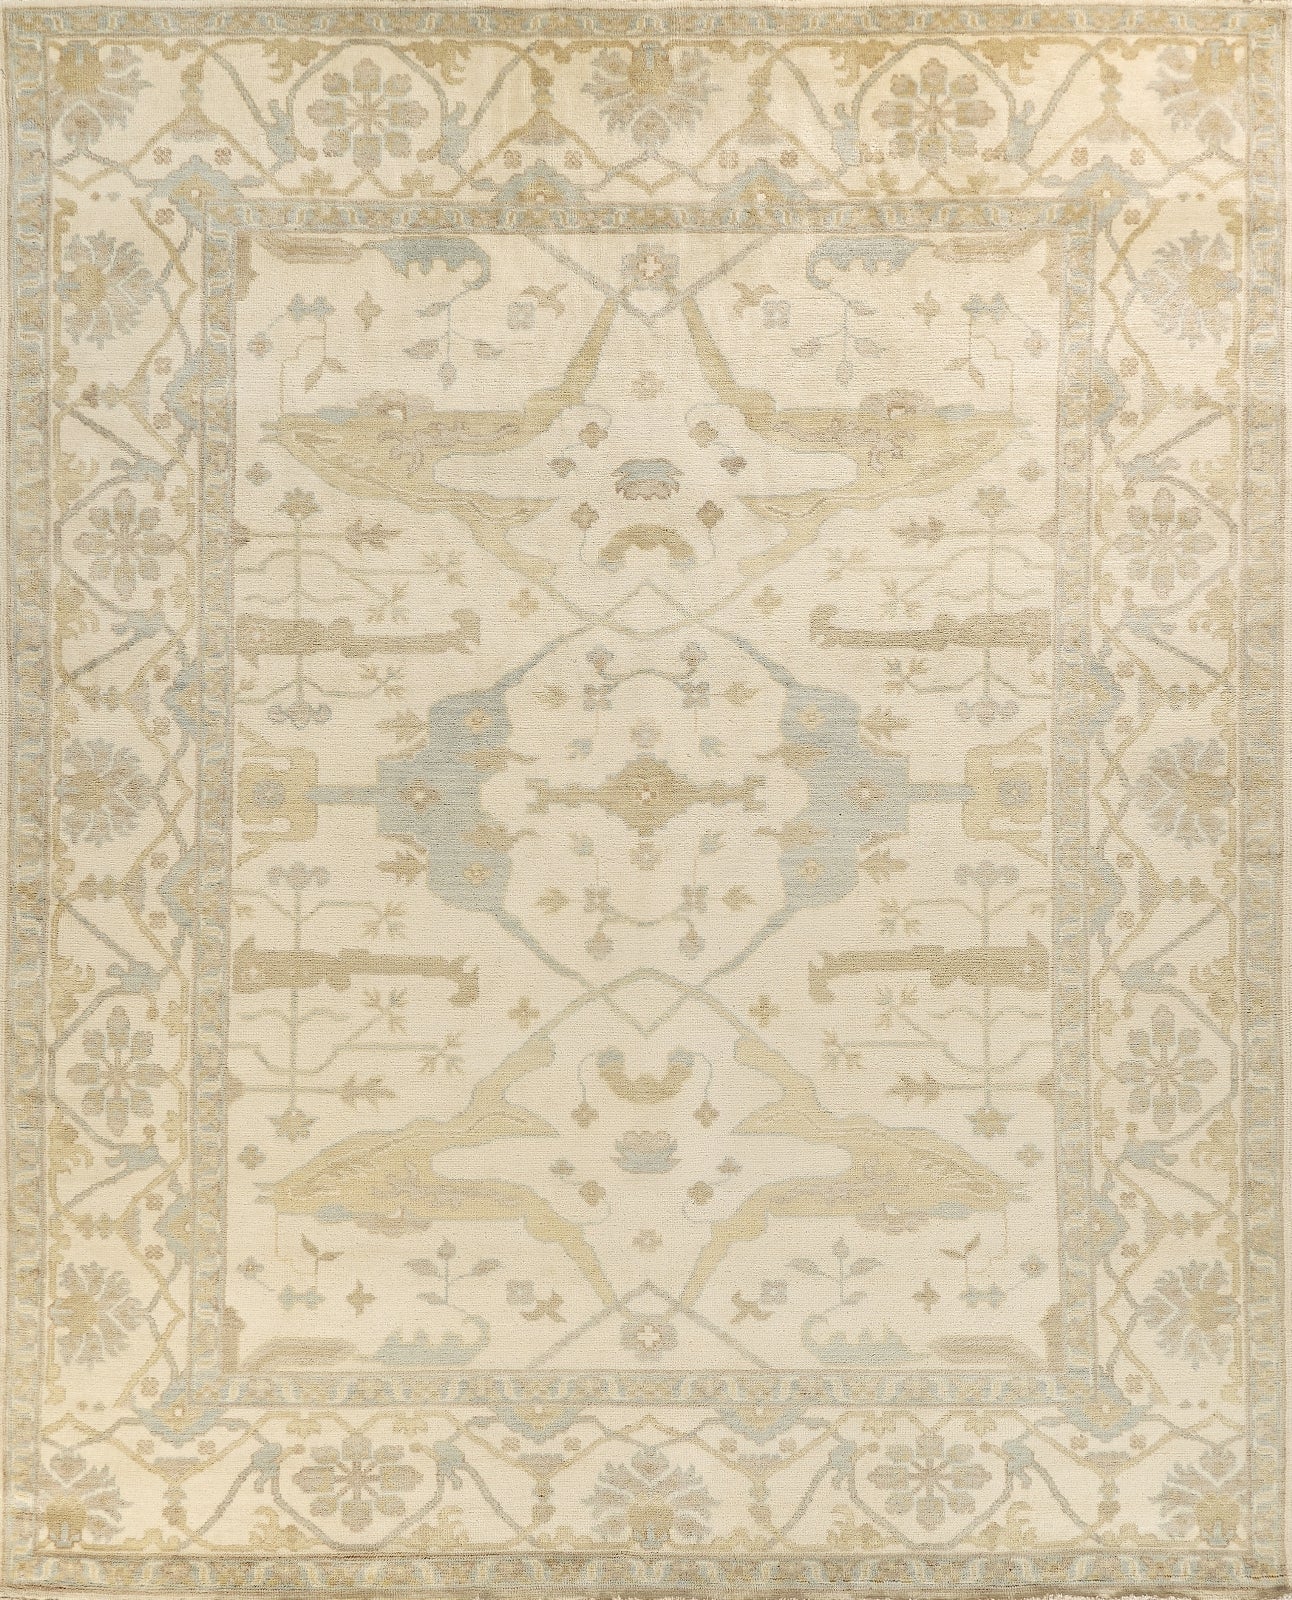 Exquisite Rugs Antique Weave Oushak 9492 Beige/Blue/Brown Area Rug